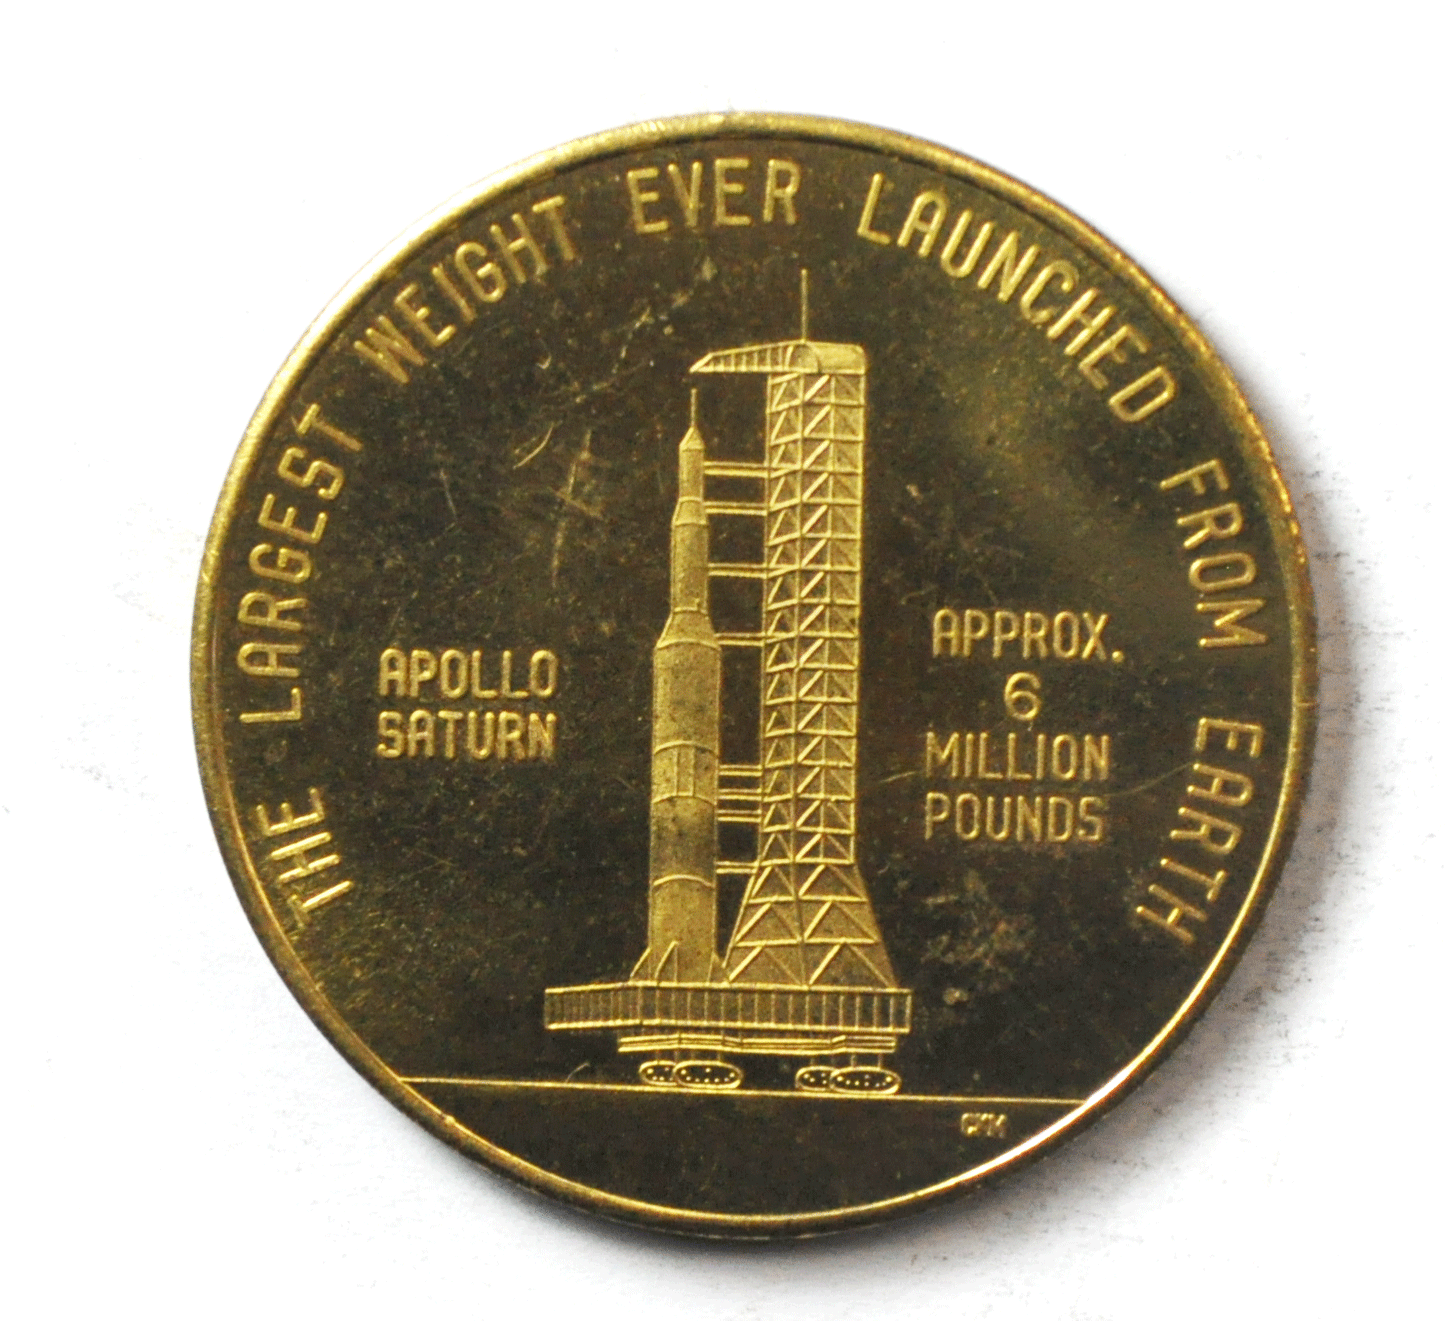 Largest Weight Launched From Earth Assembly Building Medal 39mm